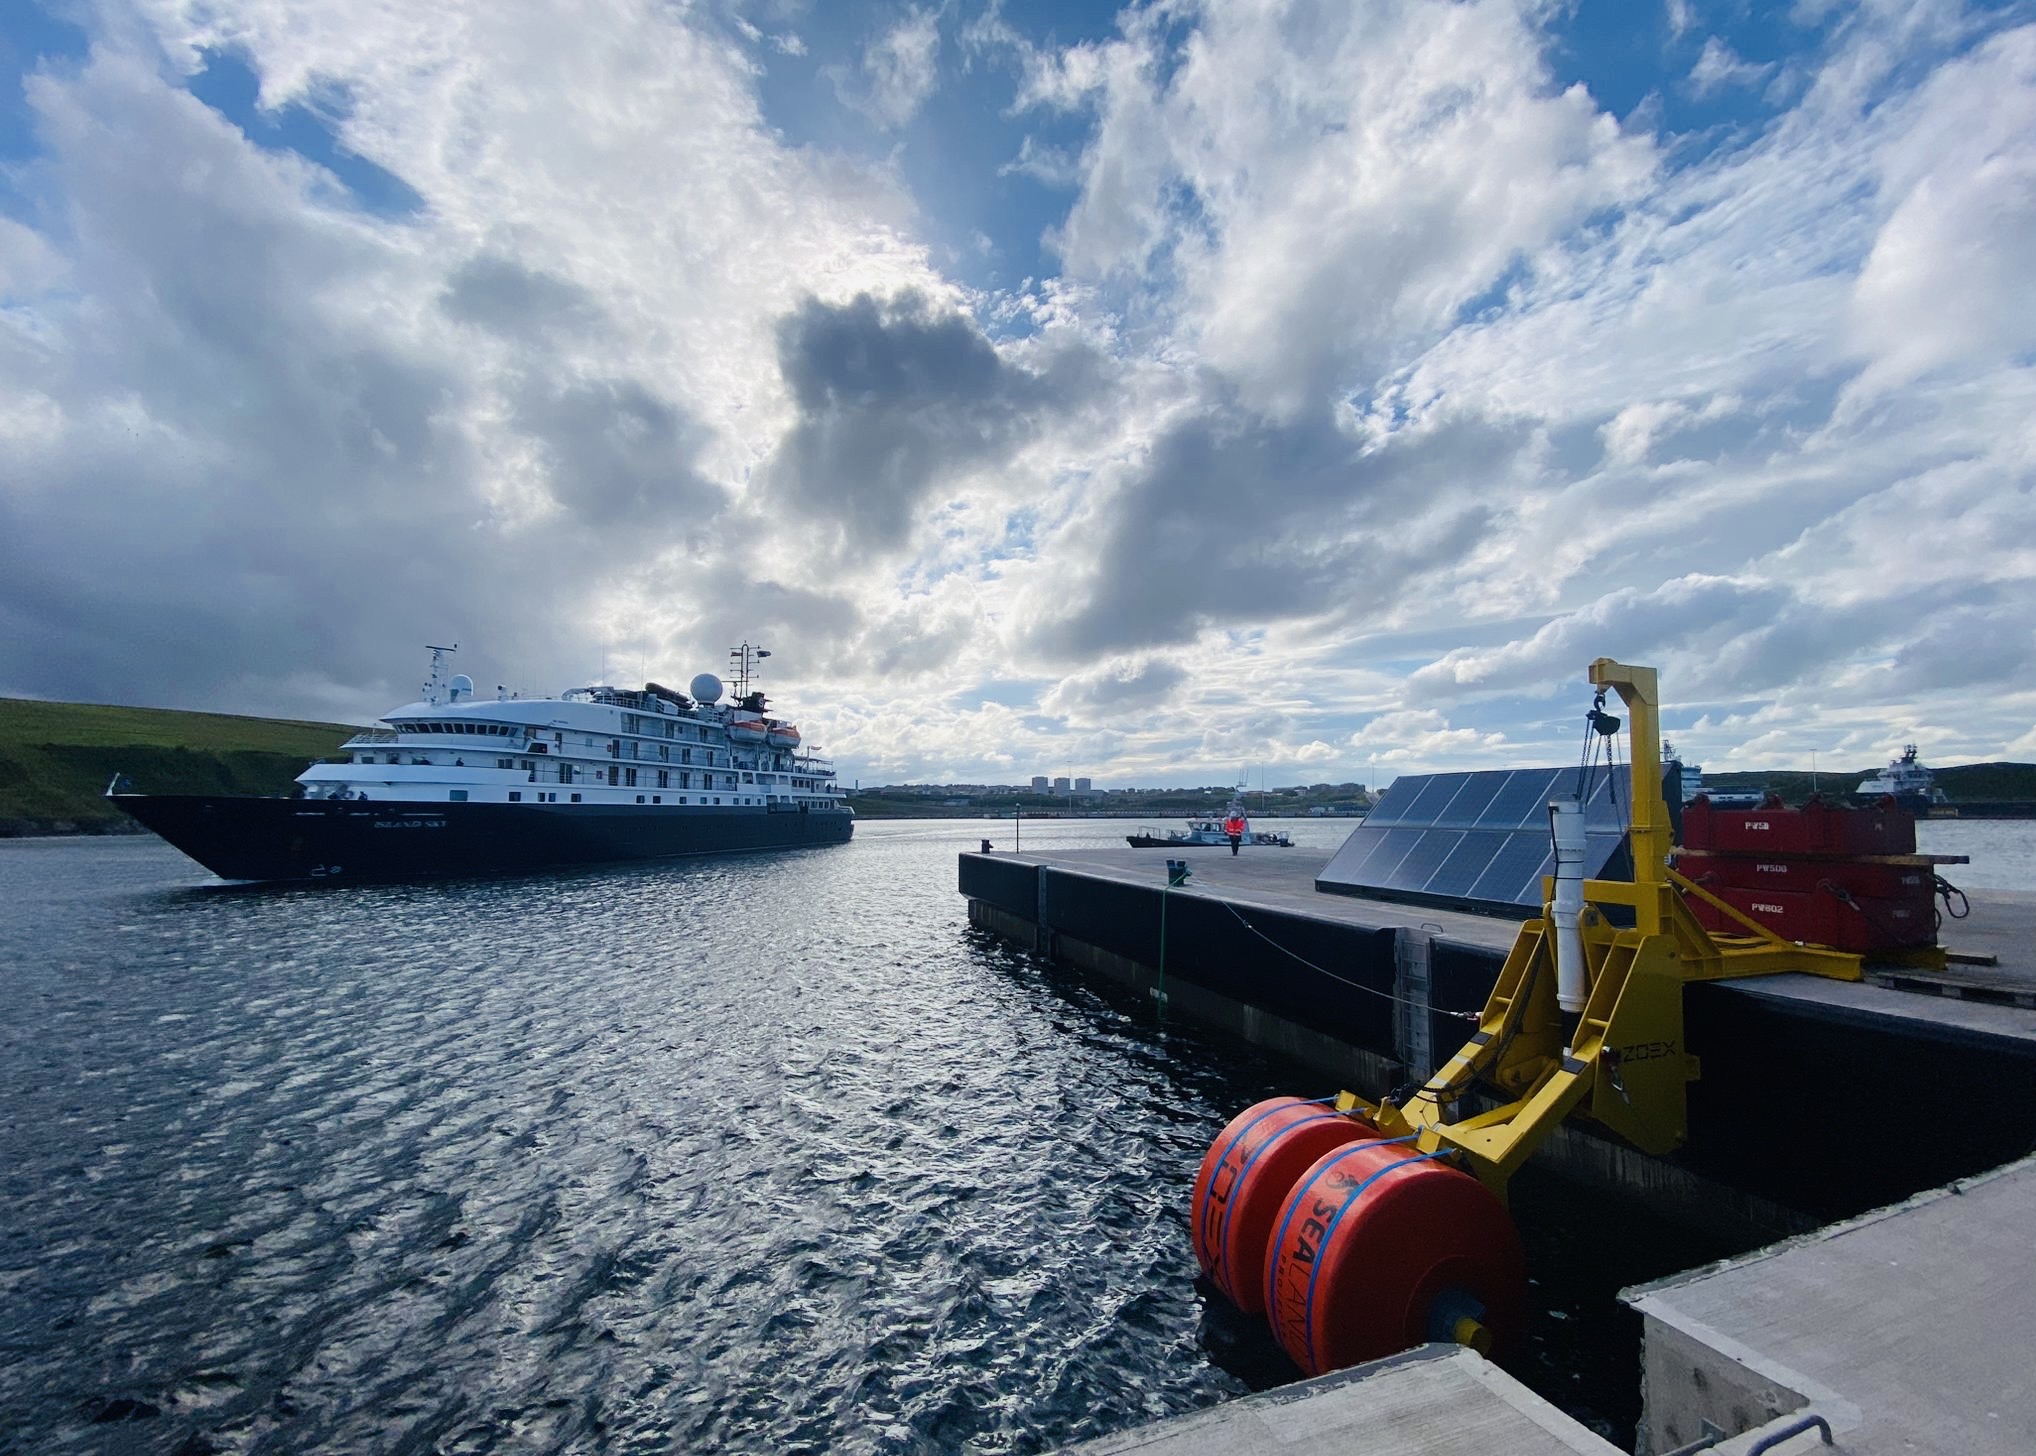 ZOEX Power installation of its 100 kW wave energy device at the Port of Aberdeen, South Harbour.